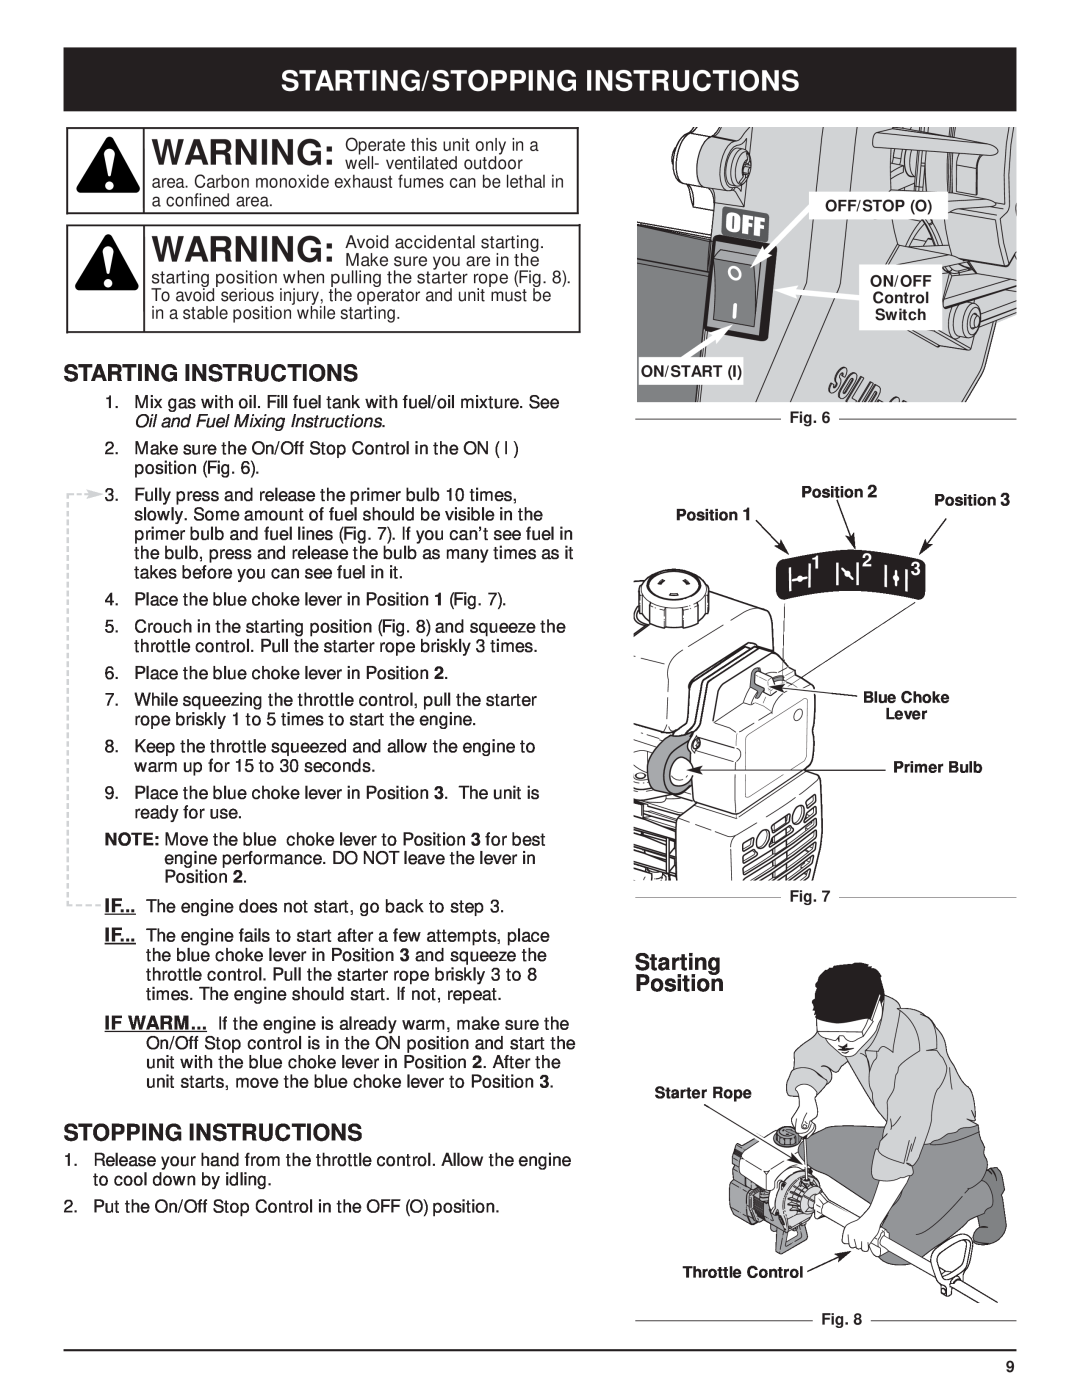 MTD Y28 manual Starting/Stopping Instructions, Starting Instructions, Starting Position 